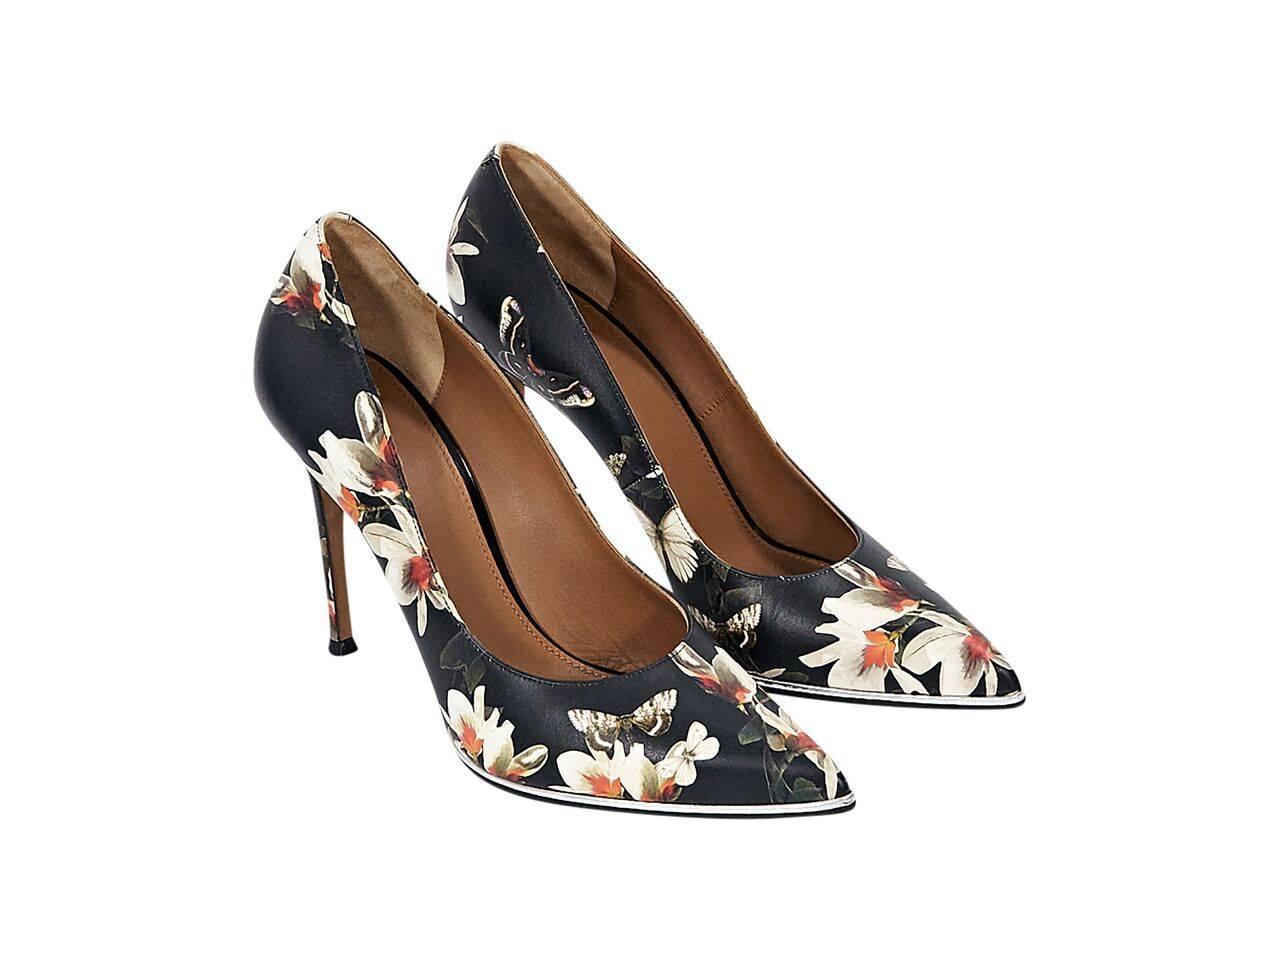 Product details:  Multicolor floral-printed leather pumps by Givenchy.  Point toe.  Slip-on style.  Shoe bags included. 
Condition: Very good.
Est. Retail $ 998.00